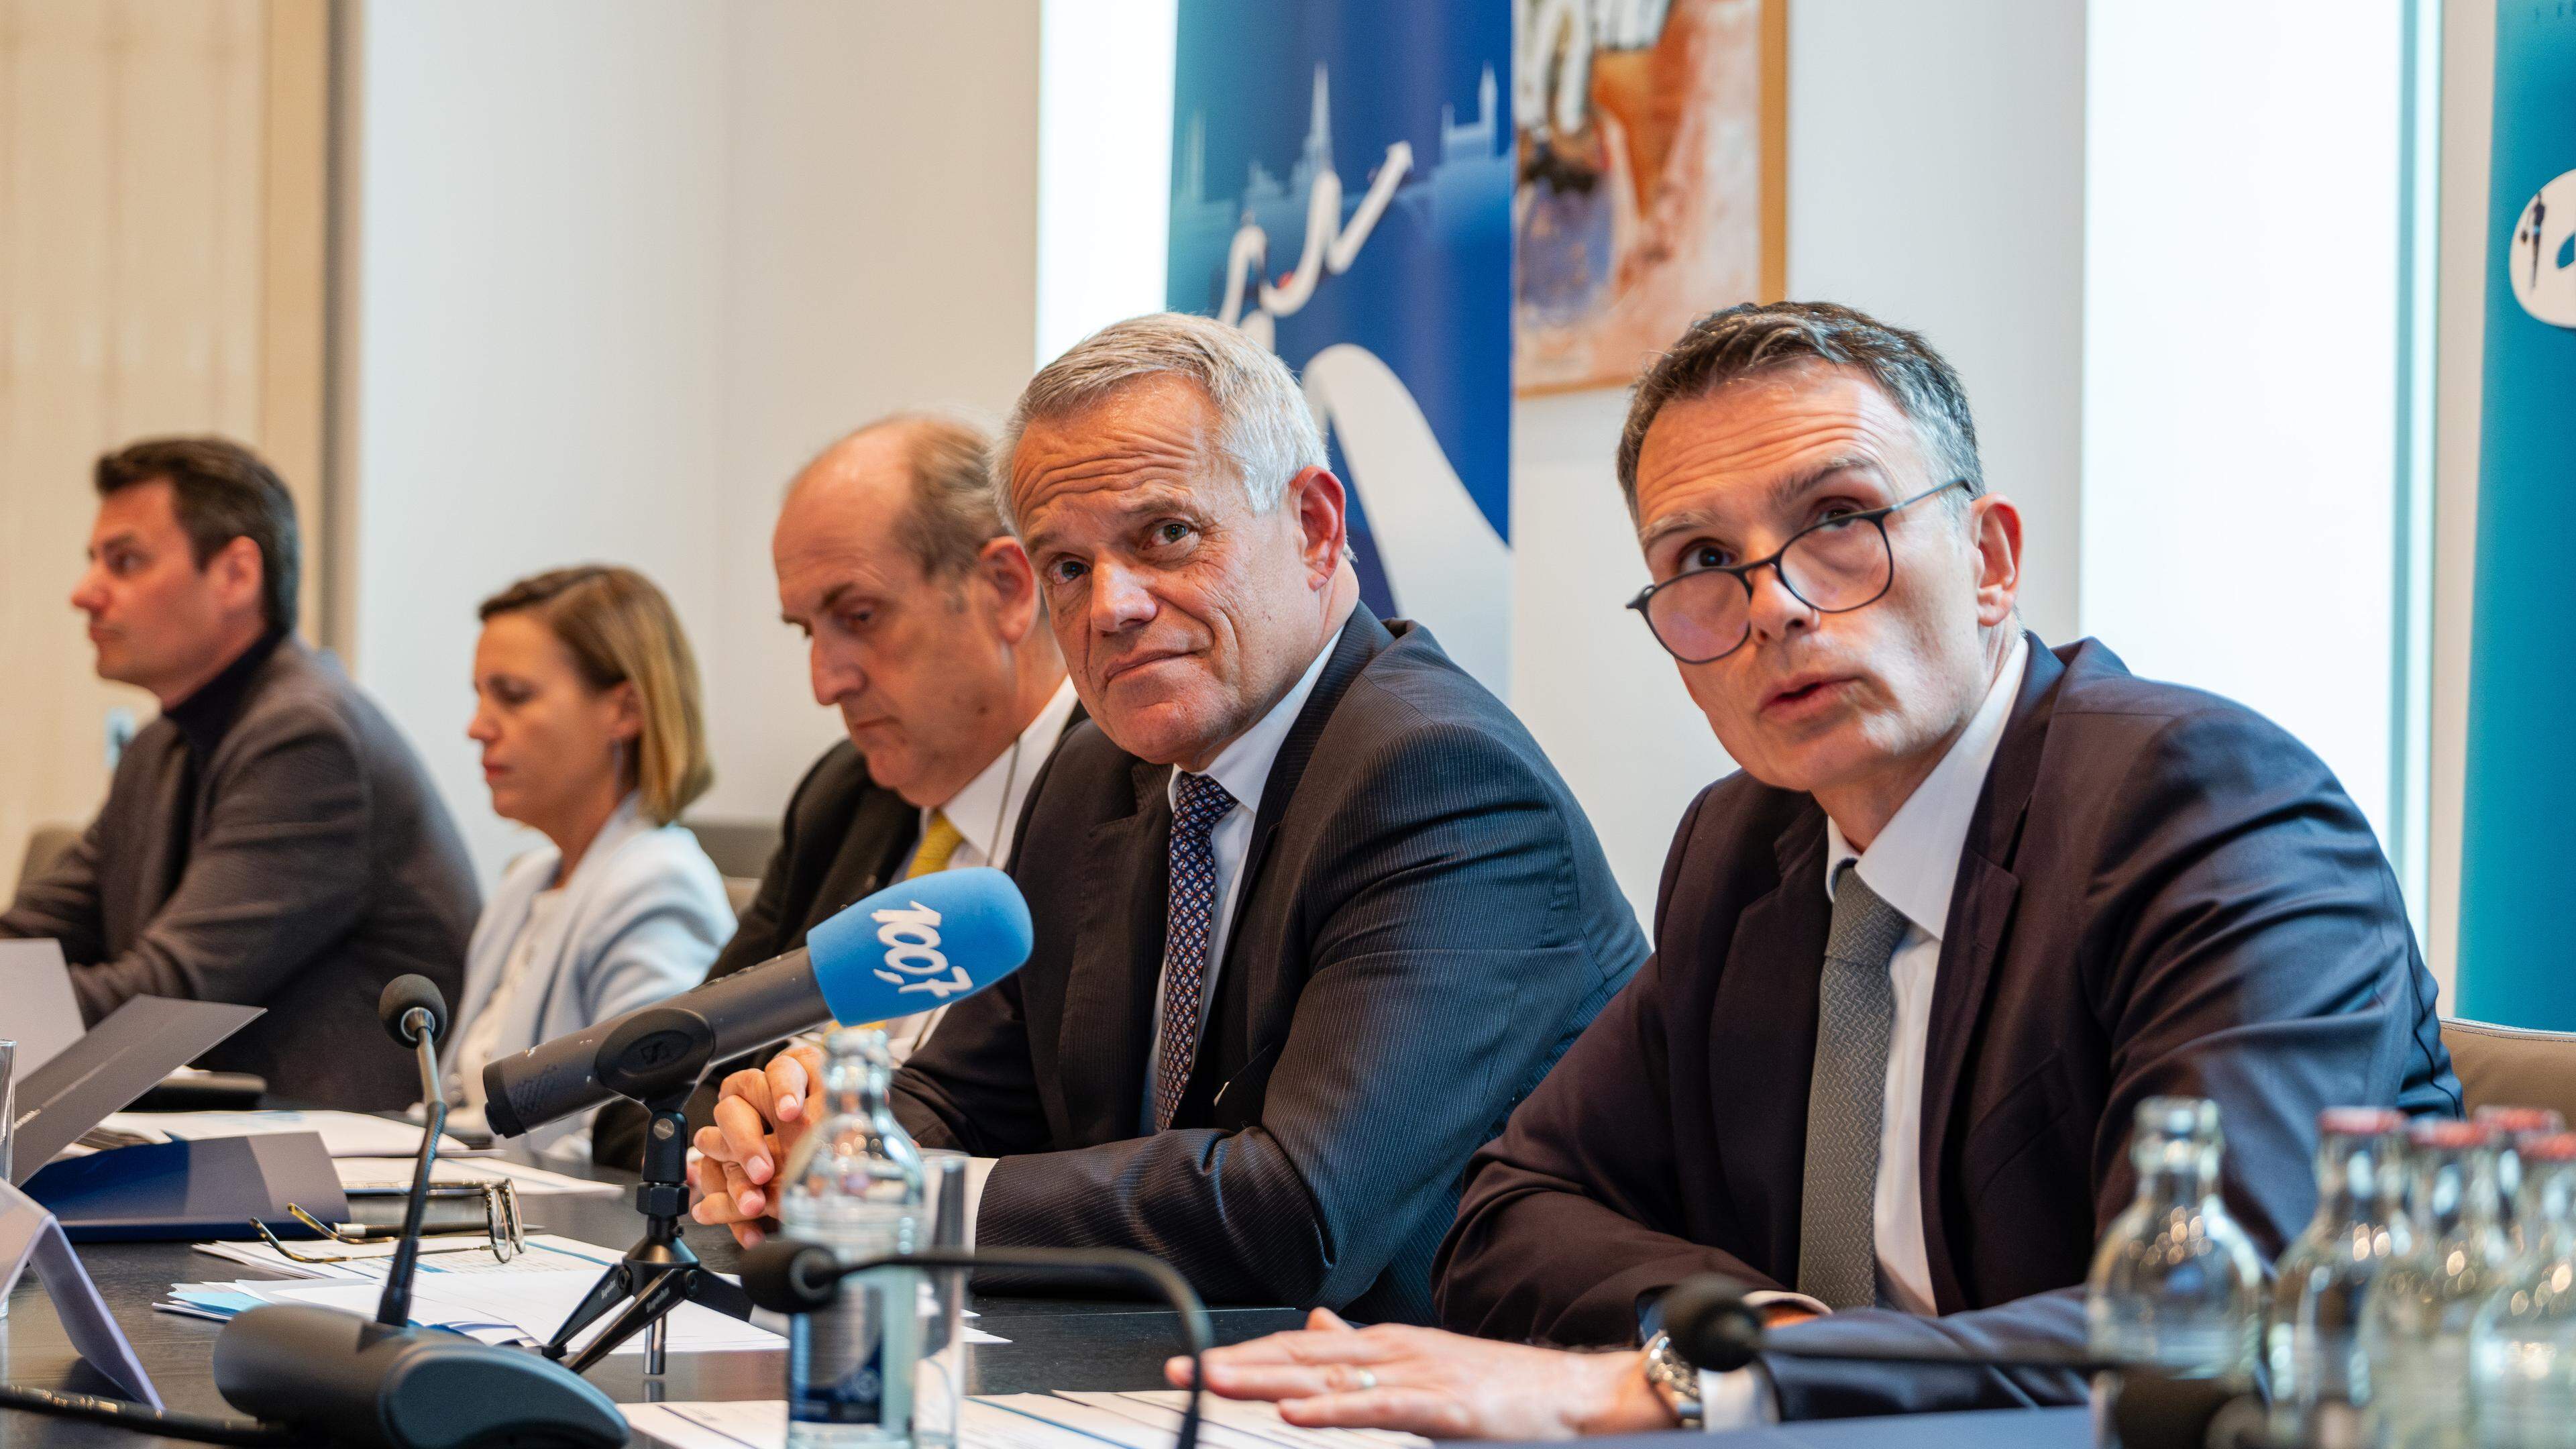 Engine of the economy: the financial sector contributes 25 to 30 per cent of Luxembourg's economic output and around 35 per cent of the state's tax revenue, emphasises the ABBL.